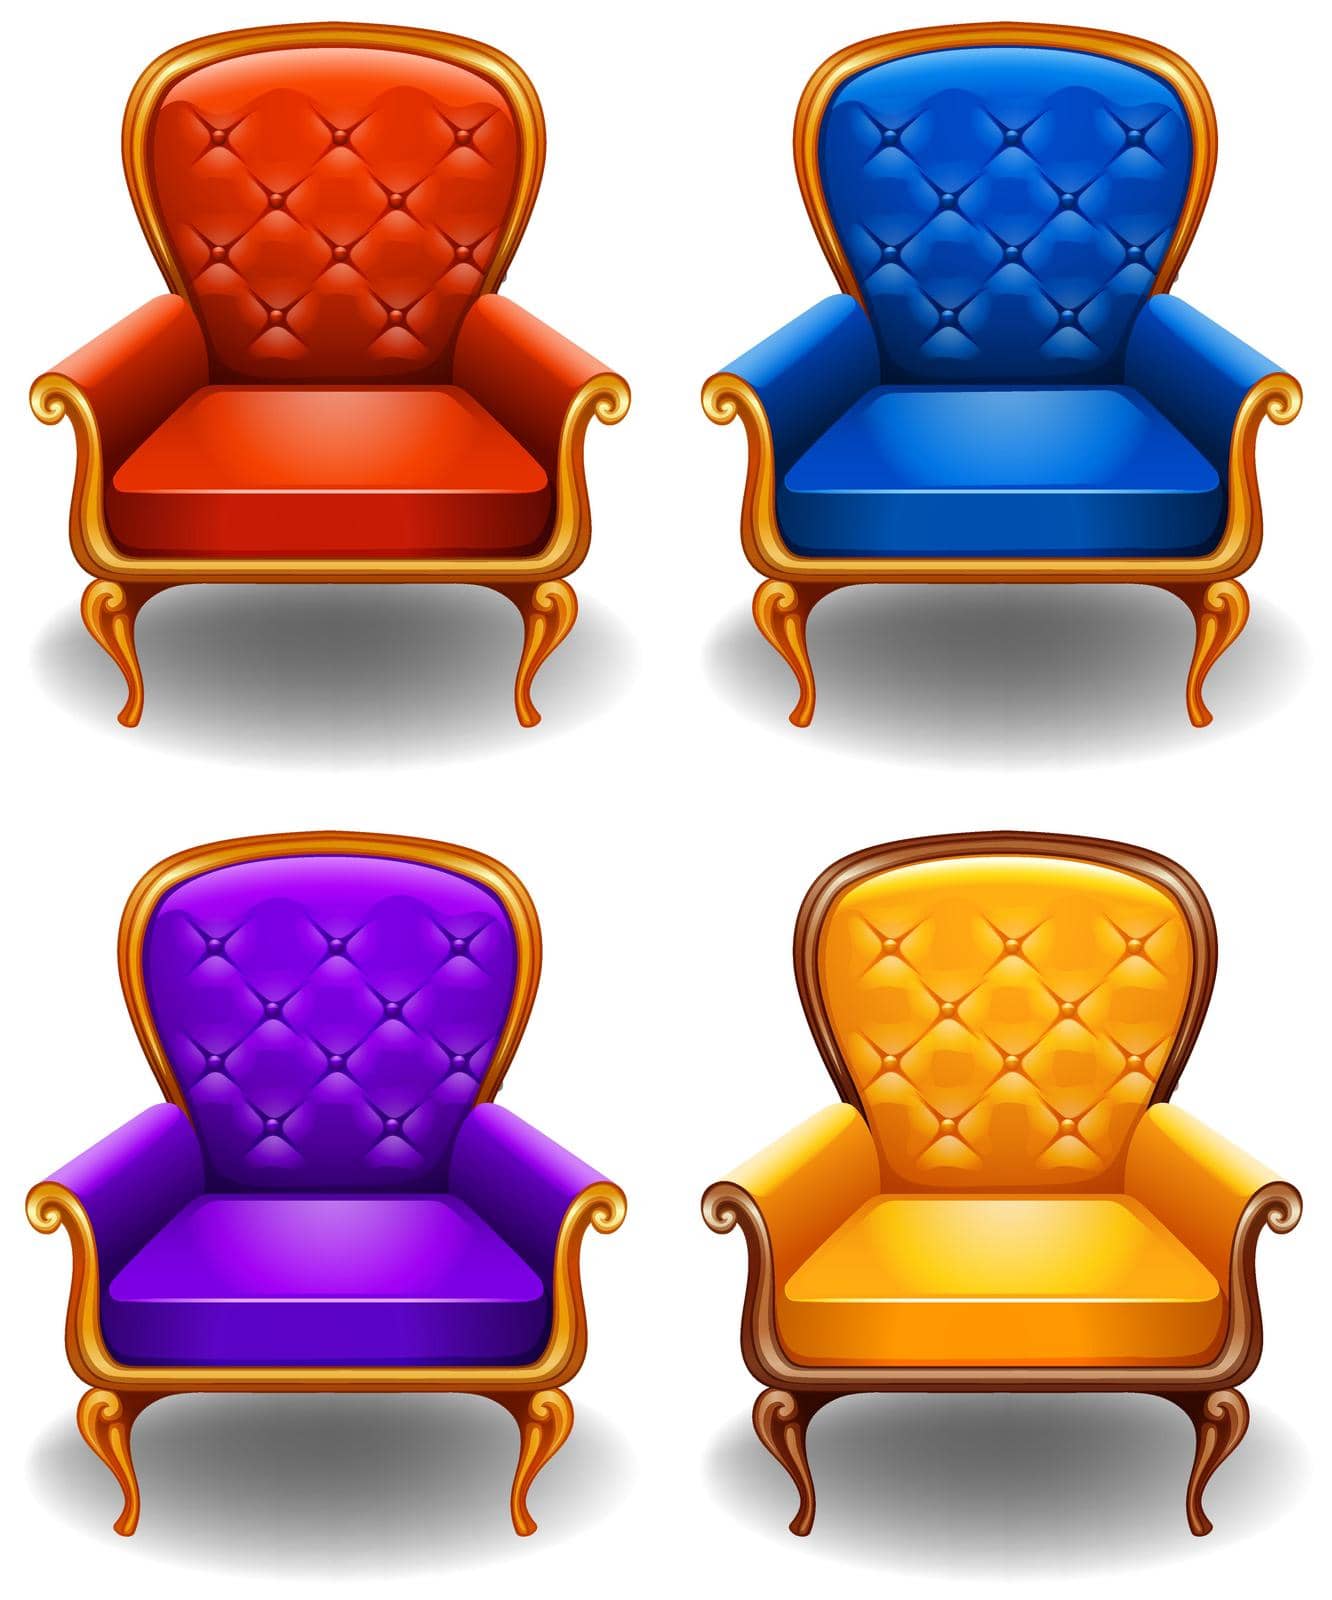 Luxury design of armchairs in four different colors